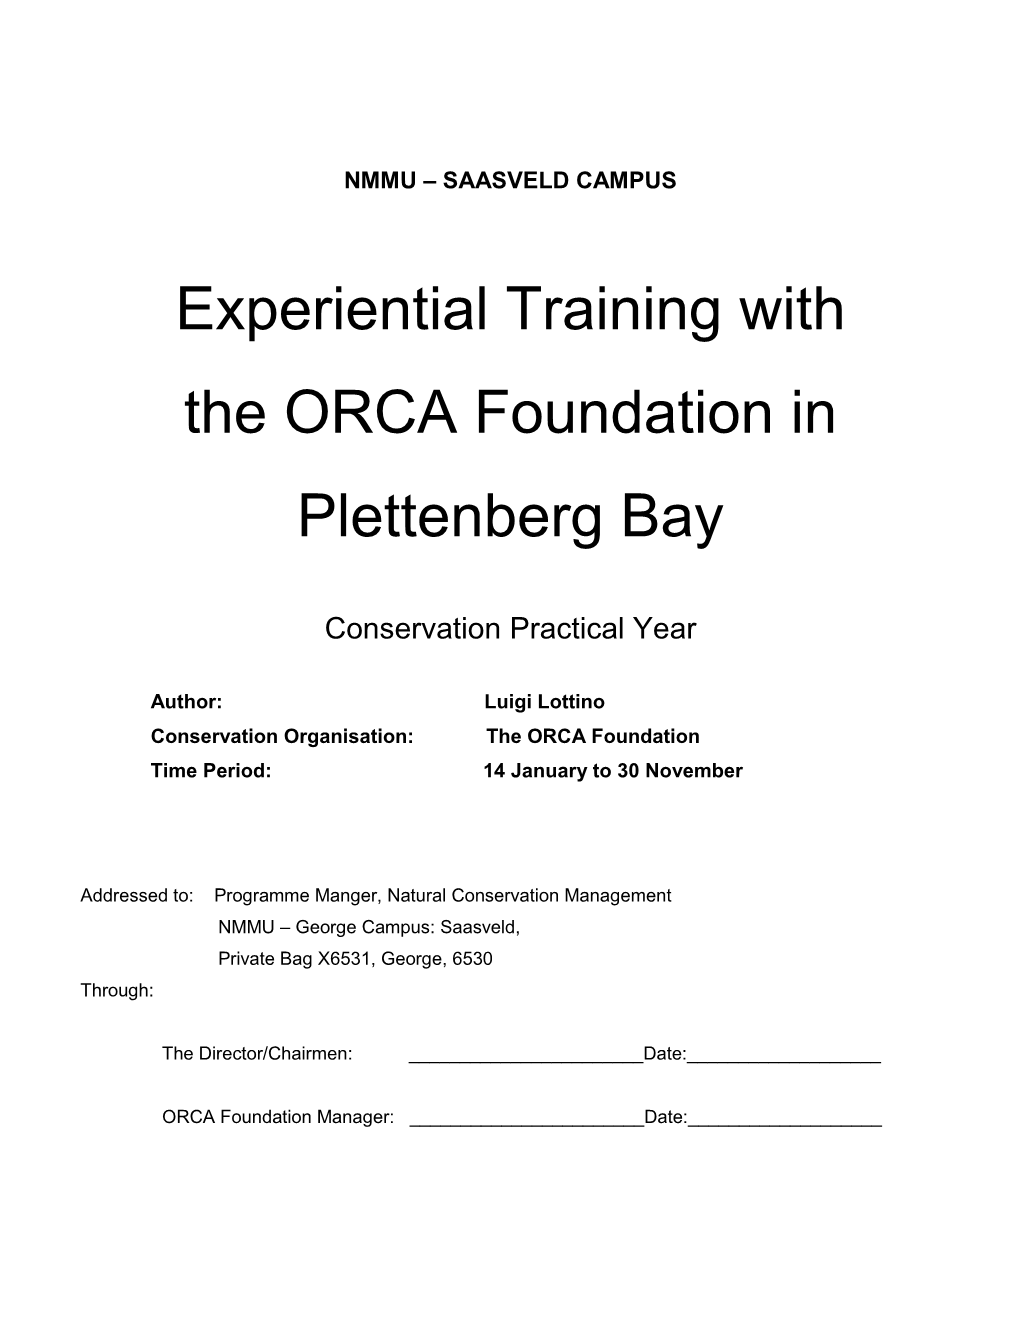 The ORCA Foundation in Plettenberg Bay